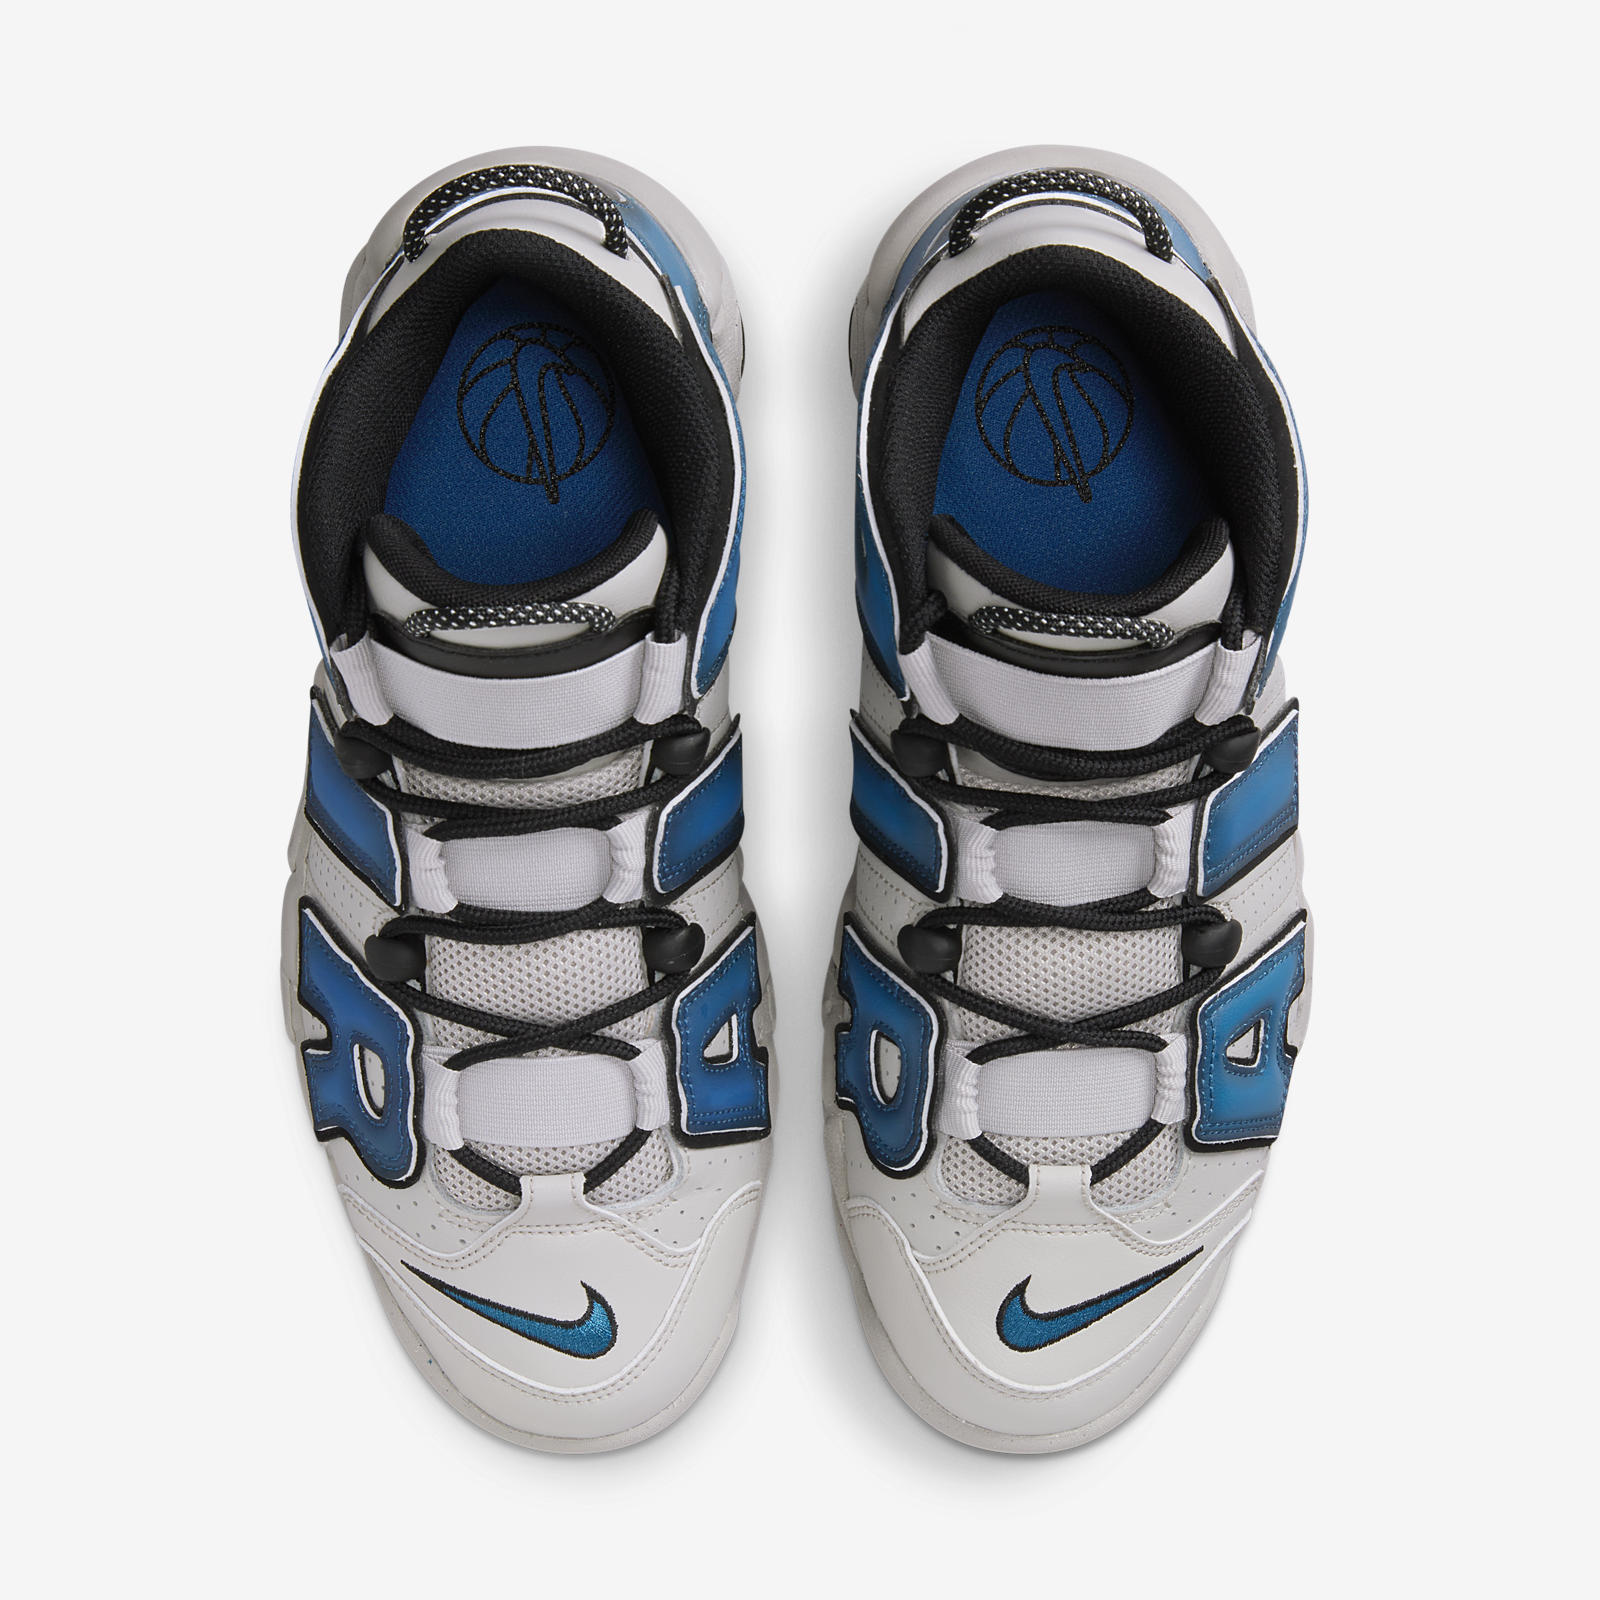 Nike Air More Uptempo
« Industrial Blue »